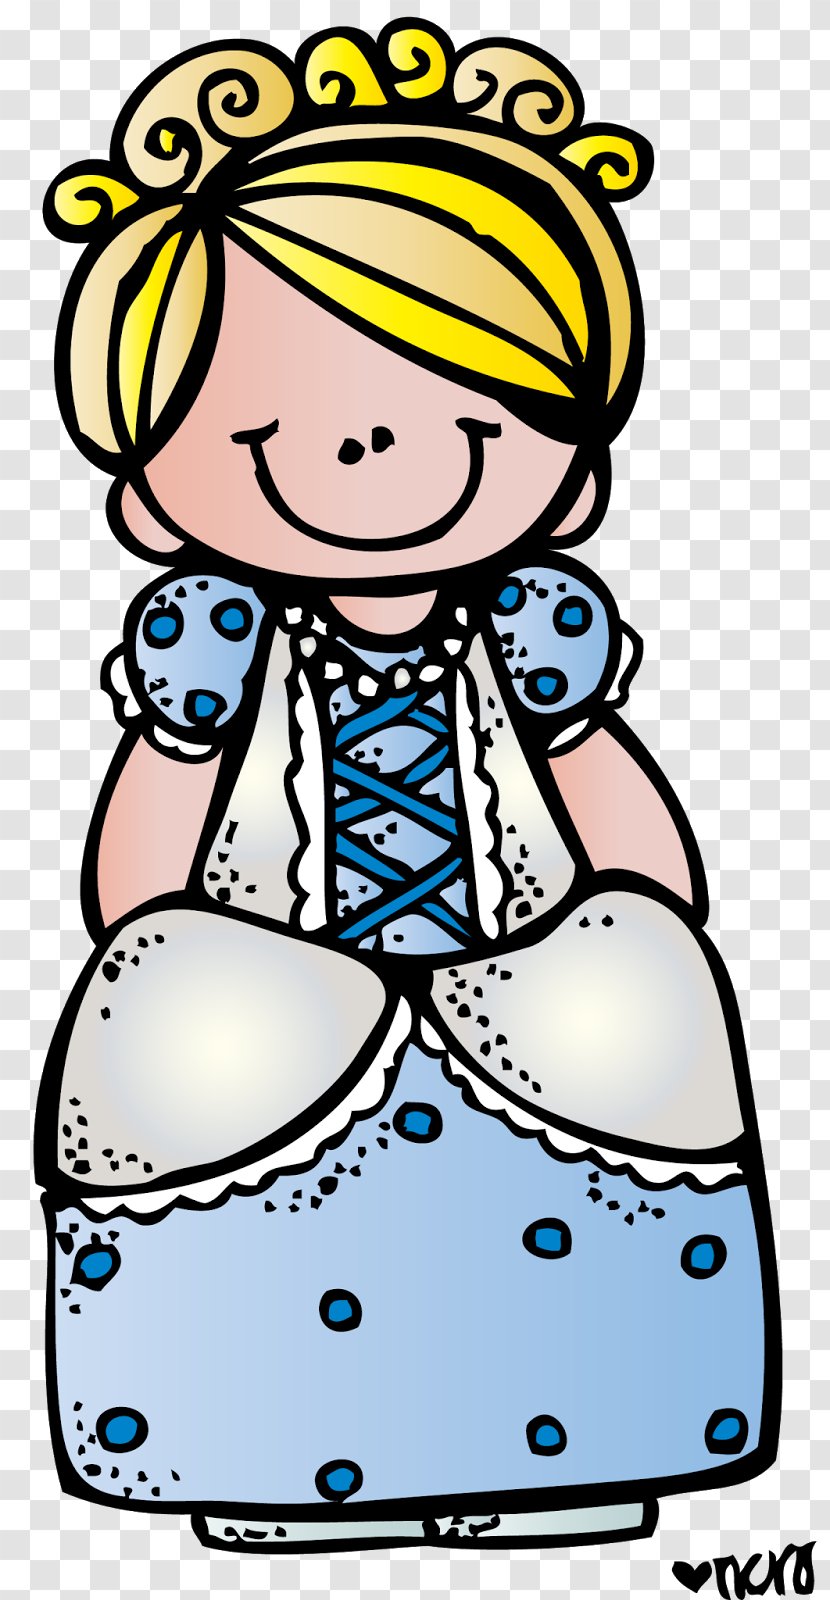 YouTube Protagonist Antagonist Character Fairy Tale - Castle Princess Transparent PNG